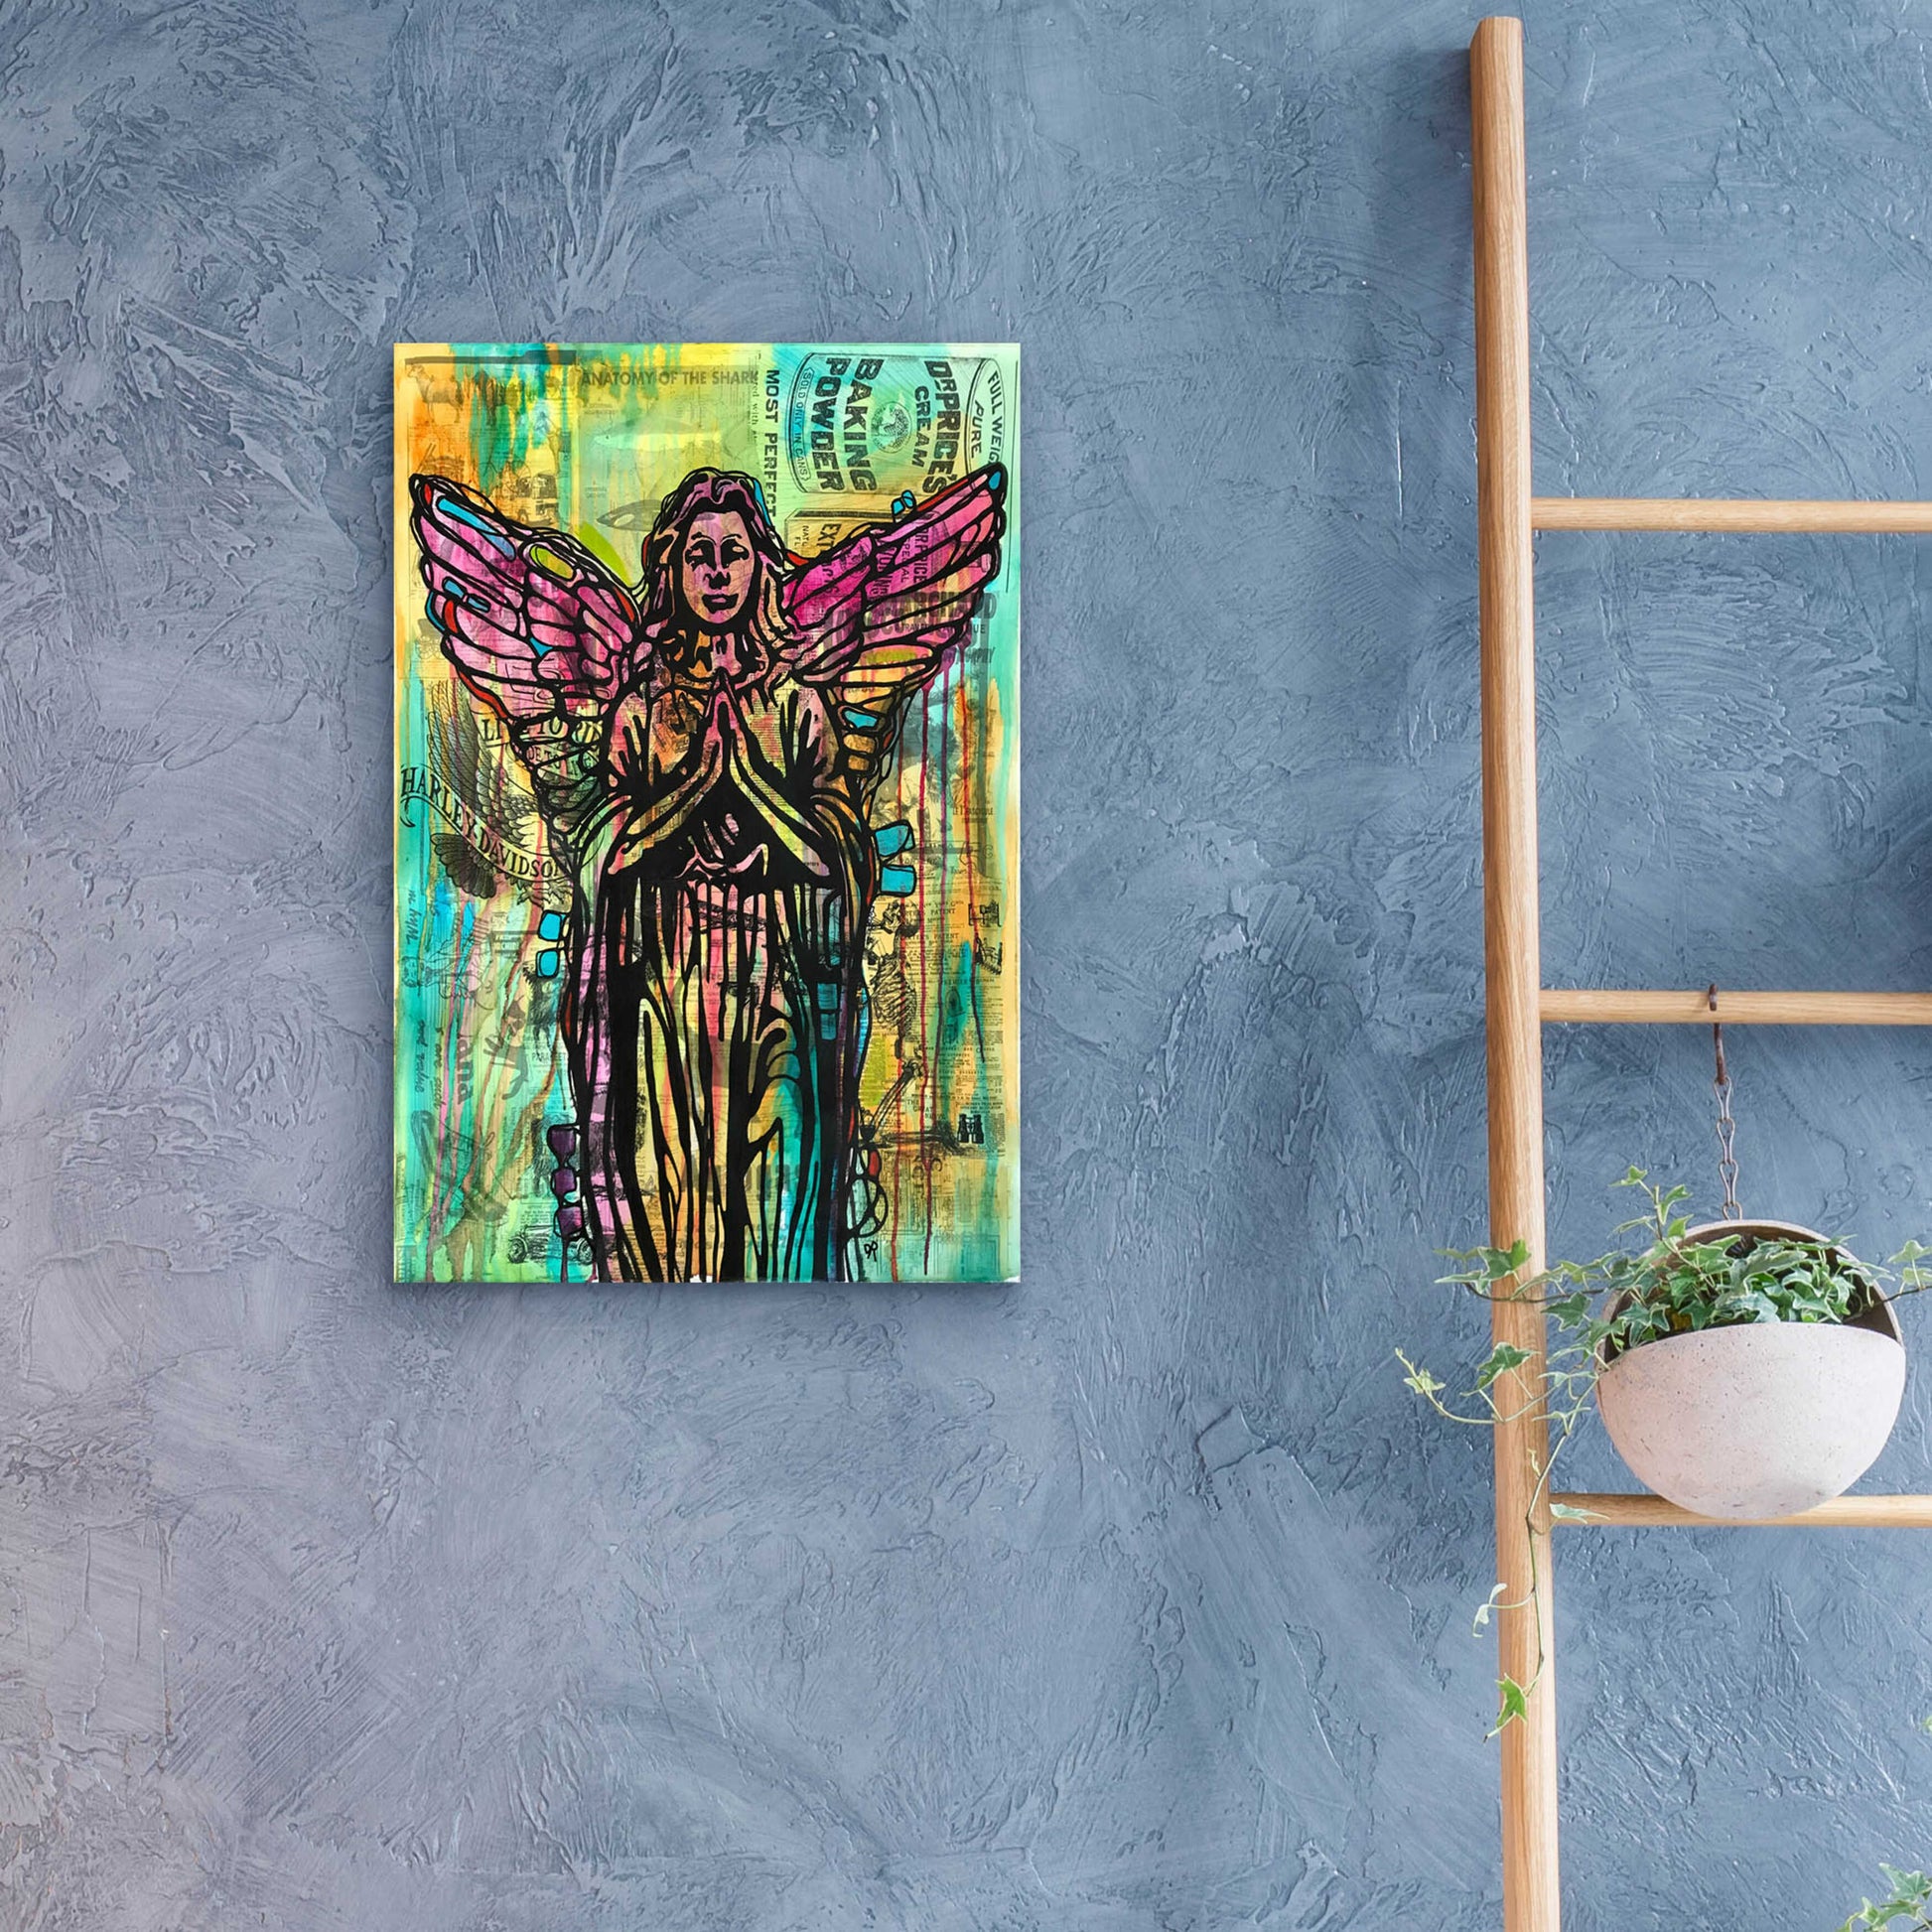 Epic Art 'Most Perfect Angel' by Dean Russo, Acrylic Glass Wall Art,16x24